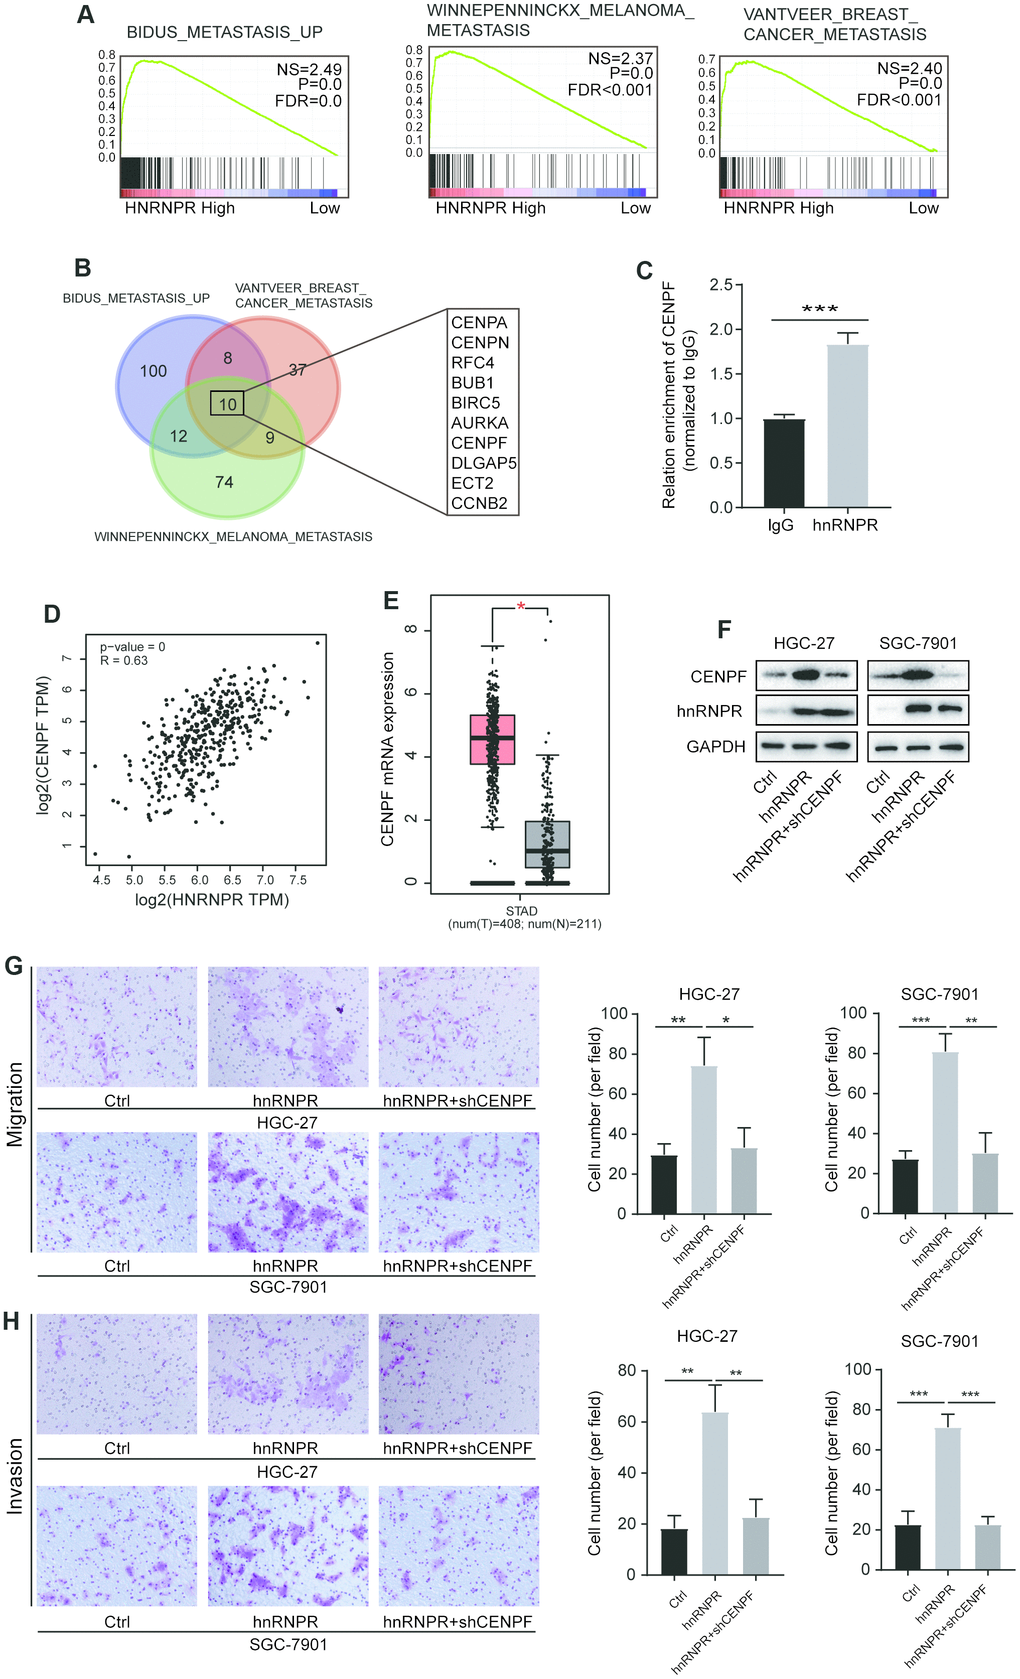 HnRNPR promoted cancer aggressiveness by binding CENPF mRNA. (A) GSEA analysis indicated that high hnRNPR expression positively correlated with three metastasis signatures. (B) Venn graph indicated that CENPA, CENPN, RFC4, BUB1, BIRC5, AURKA, CENPF, DLGAP5, ECT2, and CCNB2 were overlapped in the three groups. (C) The expression of CENPF was positively correlated with that of hnRNPR. (D) The CENPF expression in gastric tumors was significantly higher than that in normal tissues in TAGC-STAD database. (E) RIP-PCR revealed that CENPF RNA is enriched in the hnRNPR group compared to the control. (F) Two (HGC-27 and SGC-7901) cell lines control and hnRNPR cells were transfected with shRNA control or shRNA against CENPF for Immuno-blotting. (G) Migration and (H) invasion assays showed that inhibition of CENPF rescued the aggressiveness induced by hnRNPR in SGC7901 and HGC-27 cell lines. Data were from three independent experiments performed in triplicate. P values were calculated with two-tailed unpaired Student’s t test. The expression correlation was determined with Pearson’s correlation analysis. *, P